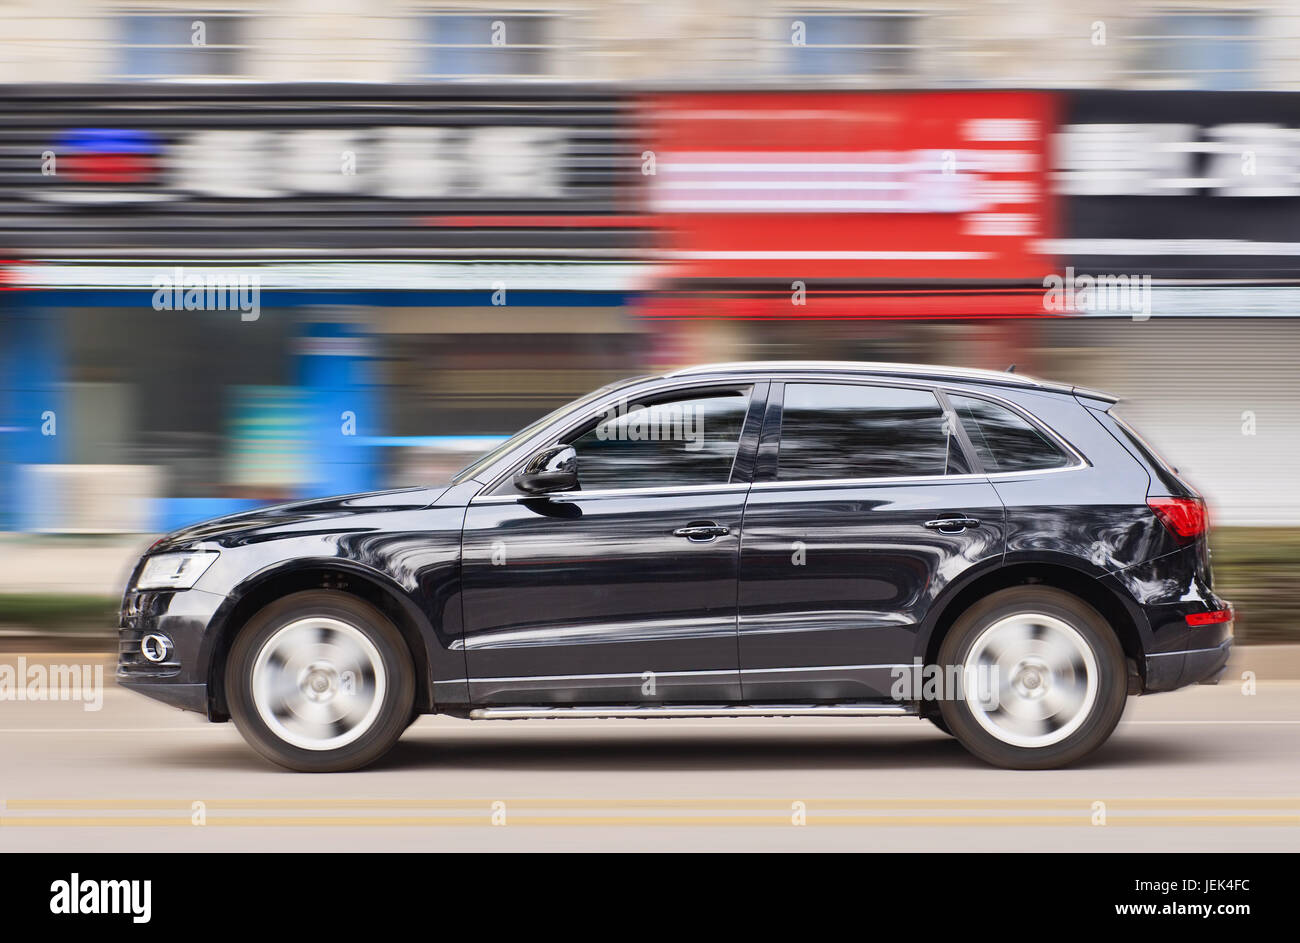 YIWU-CHINA-JANUARY 20, 2016. Audi Q5 SUV. China alone forms almost one-third of Audi’s sales volume, and the German brand holds the dominant position. Stock Photo